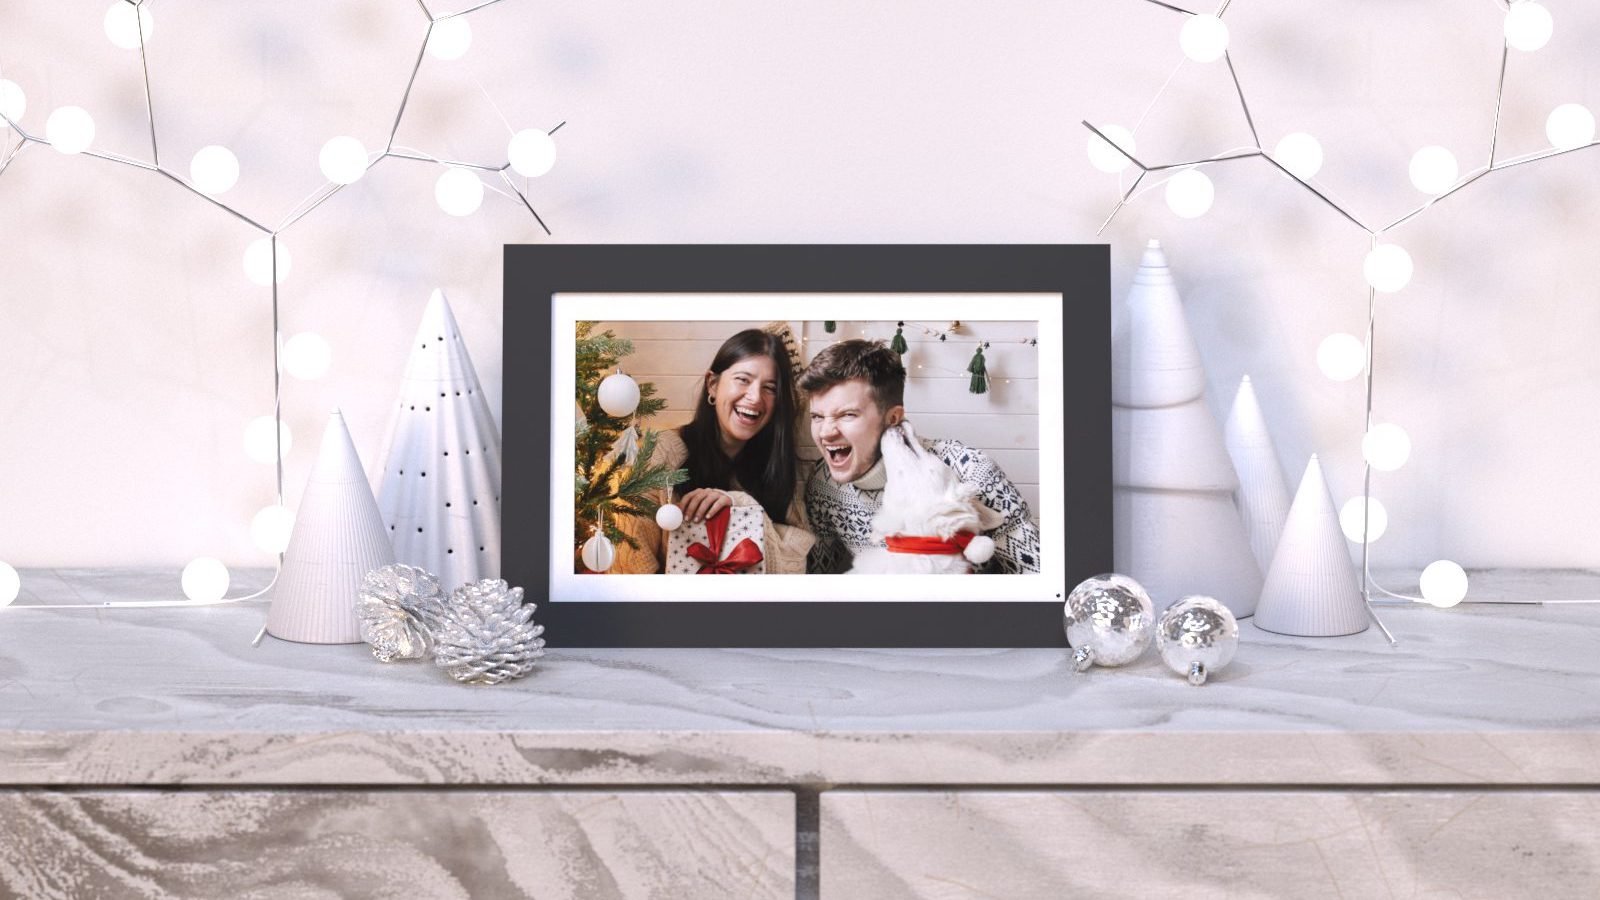 Simply Smart Home PhotoShare WiFi Digital Picture Frame holds more than 5,000 photos